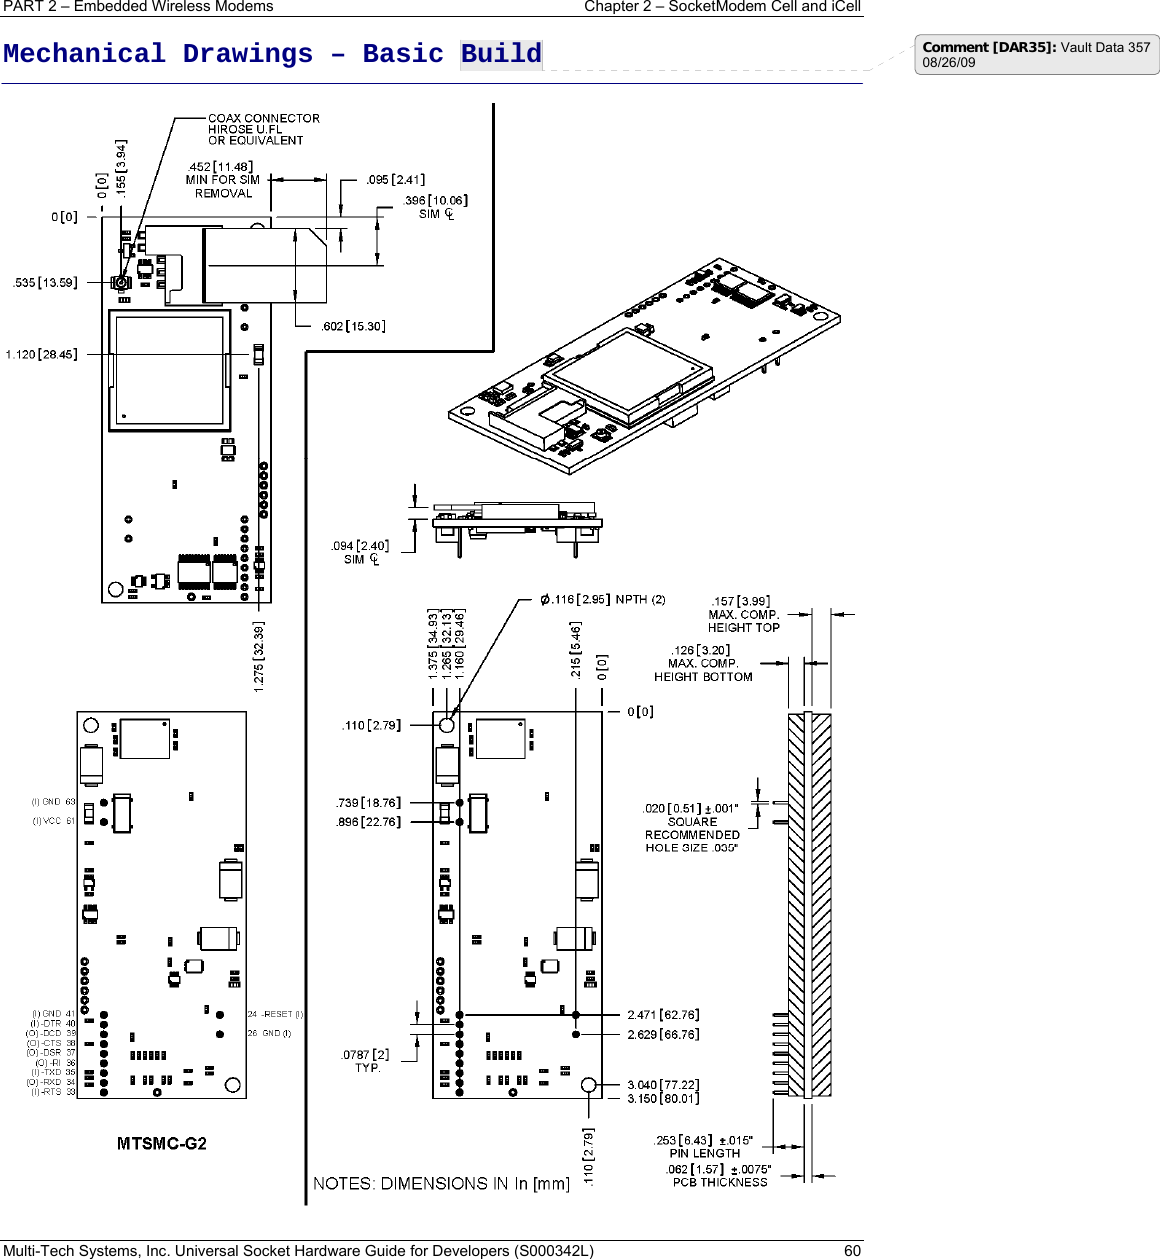 PART 2 – Embedded Wireless Modems   Chapter 2 – SocketModem Cell and iCell Multi-Tech Systems, Inc. Universal Socket Hardware Guide for Developers (S000342L)  60  Mechanical Drawings – Basic Build   Comment [DAR35]: Vault Data 357 08/26/09 